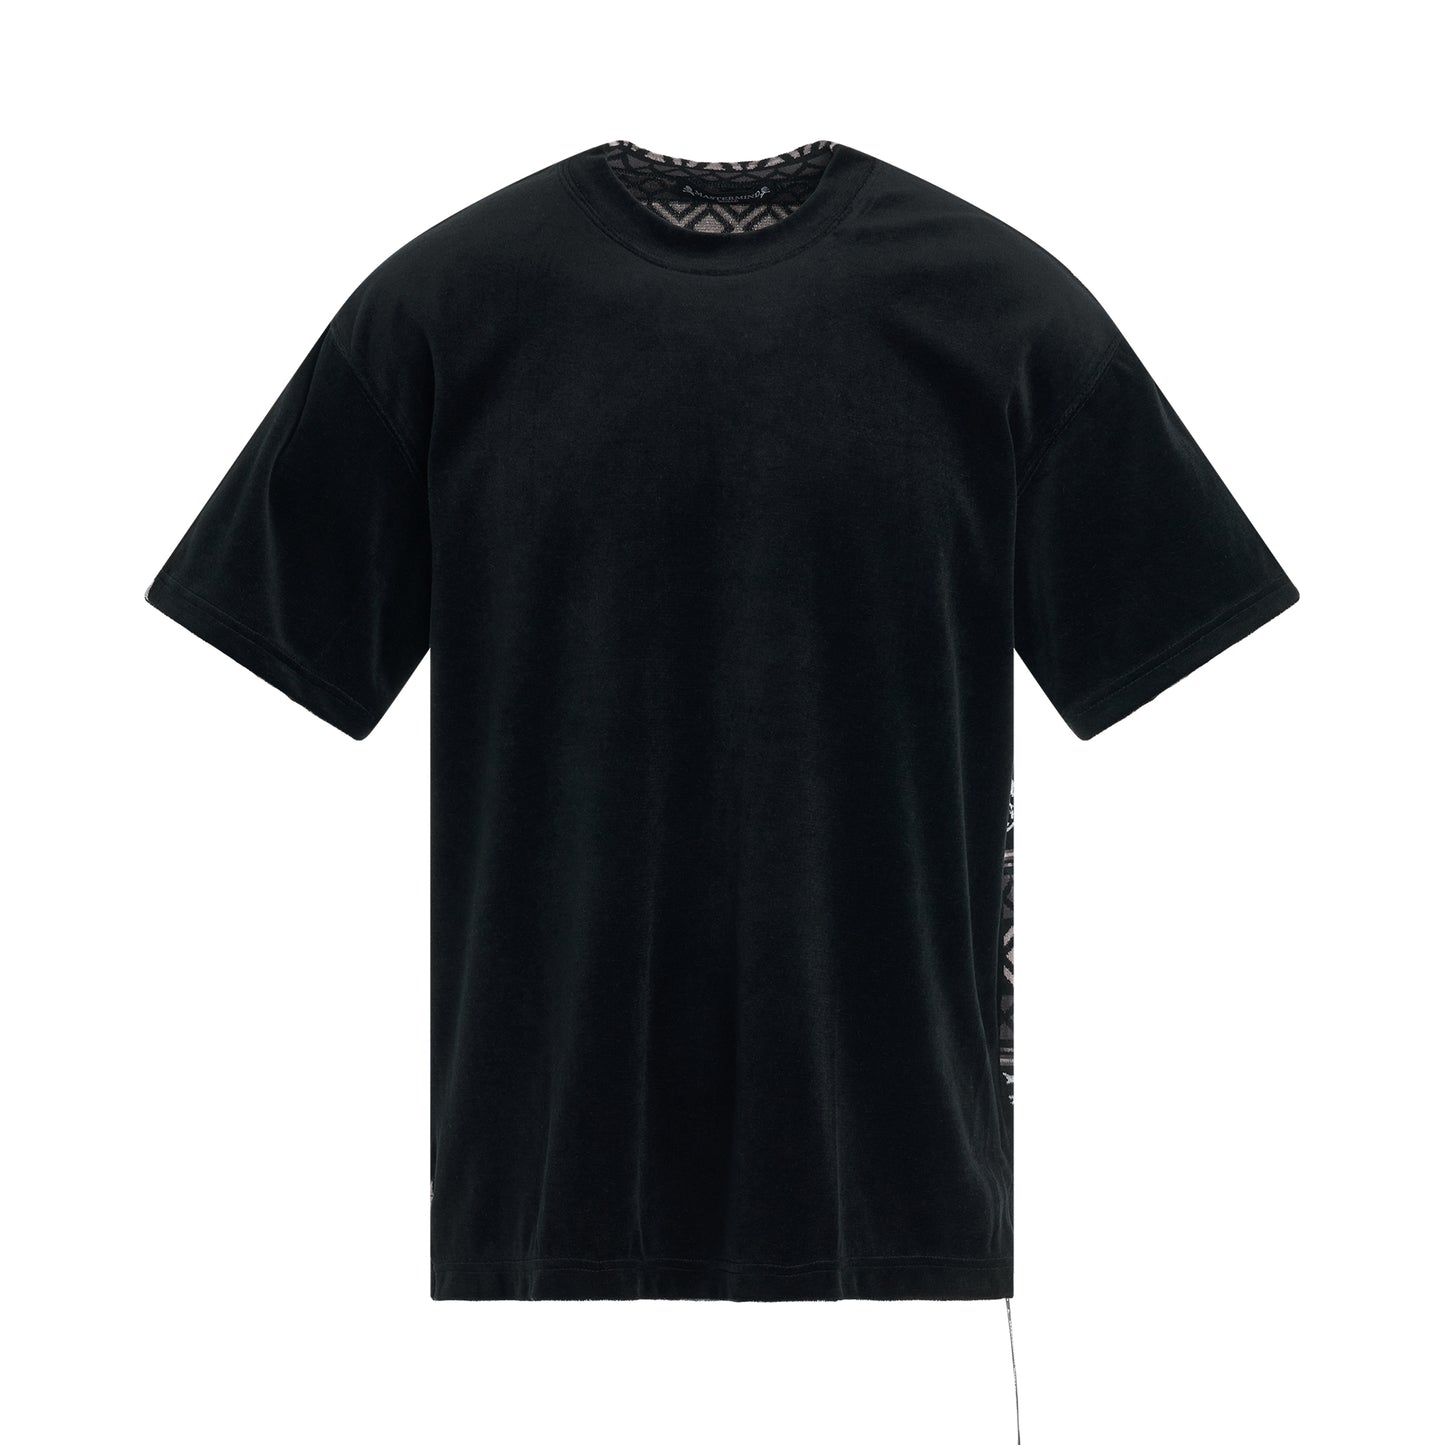 Switched Velour T-Shirt in Black